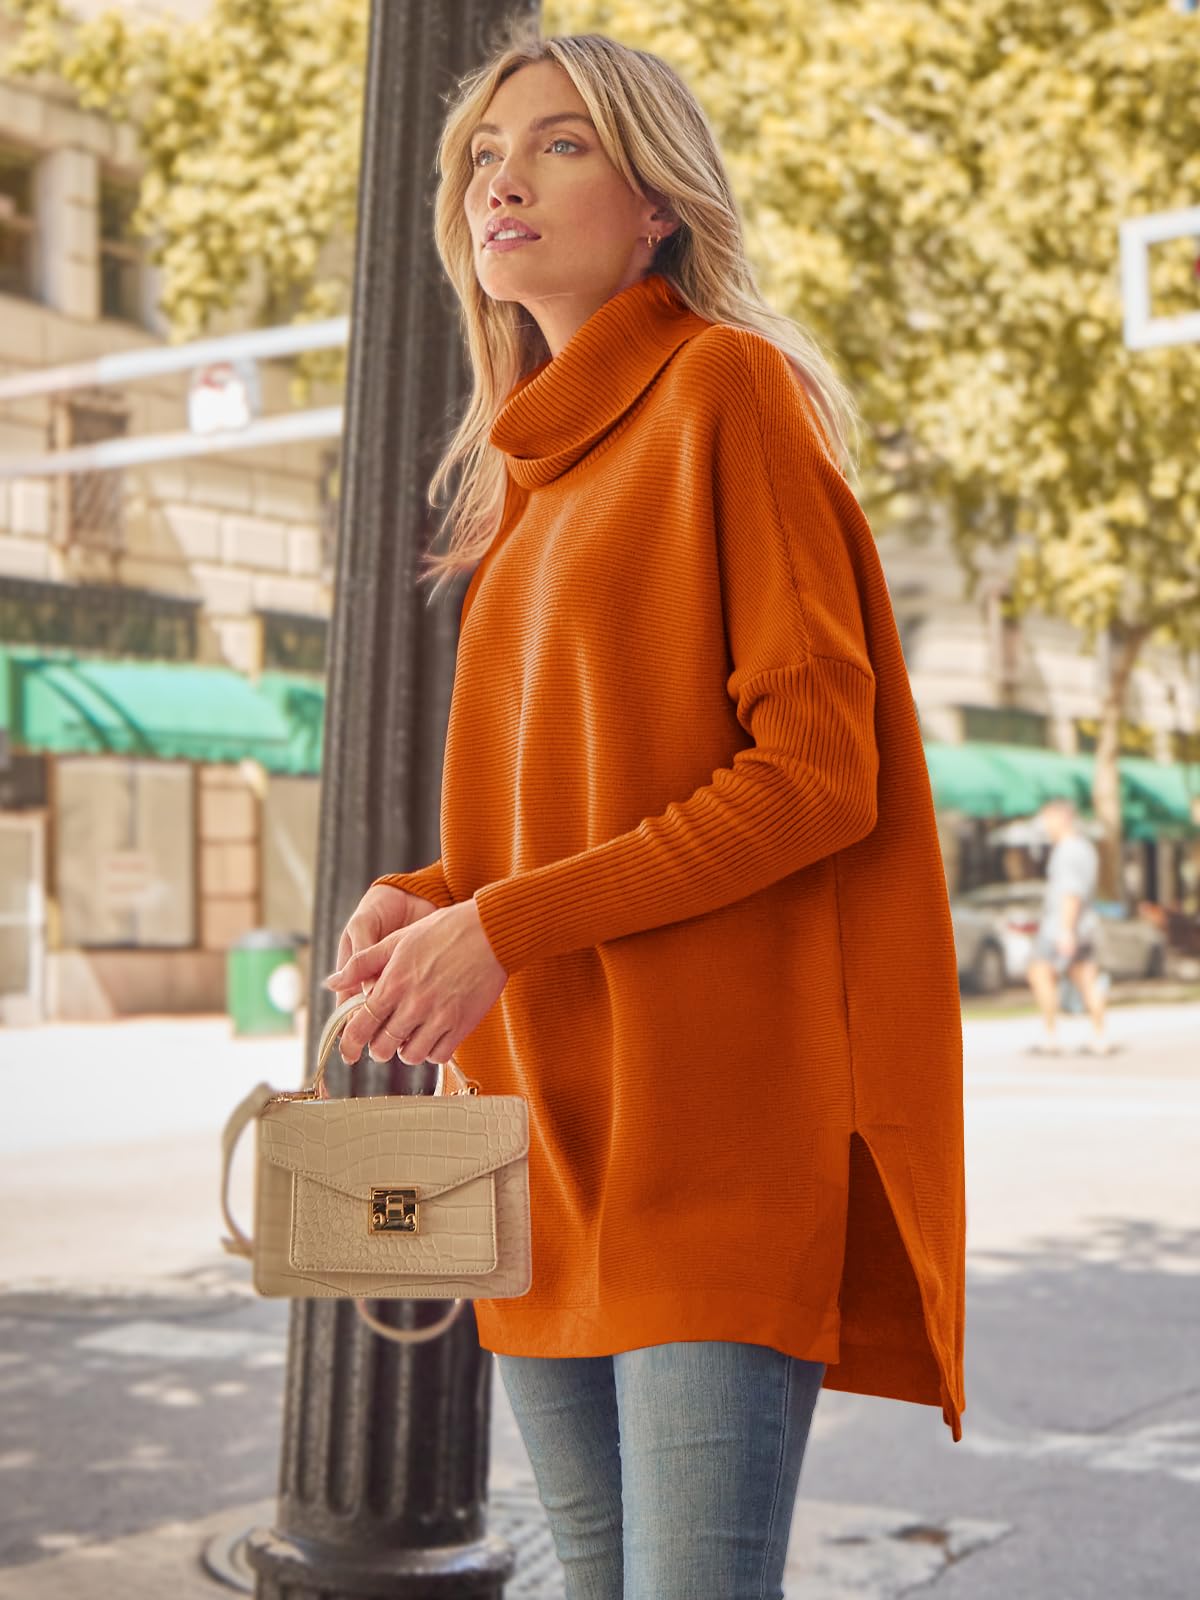 LILLUSORY Orange Turtleneck Oversized Sweaters Long Batwing Sleeve Tunic Pullover Sweater Knit Tops